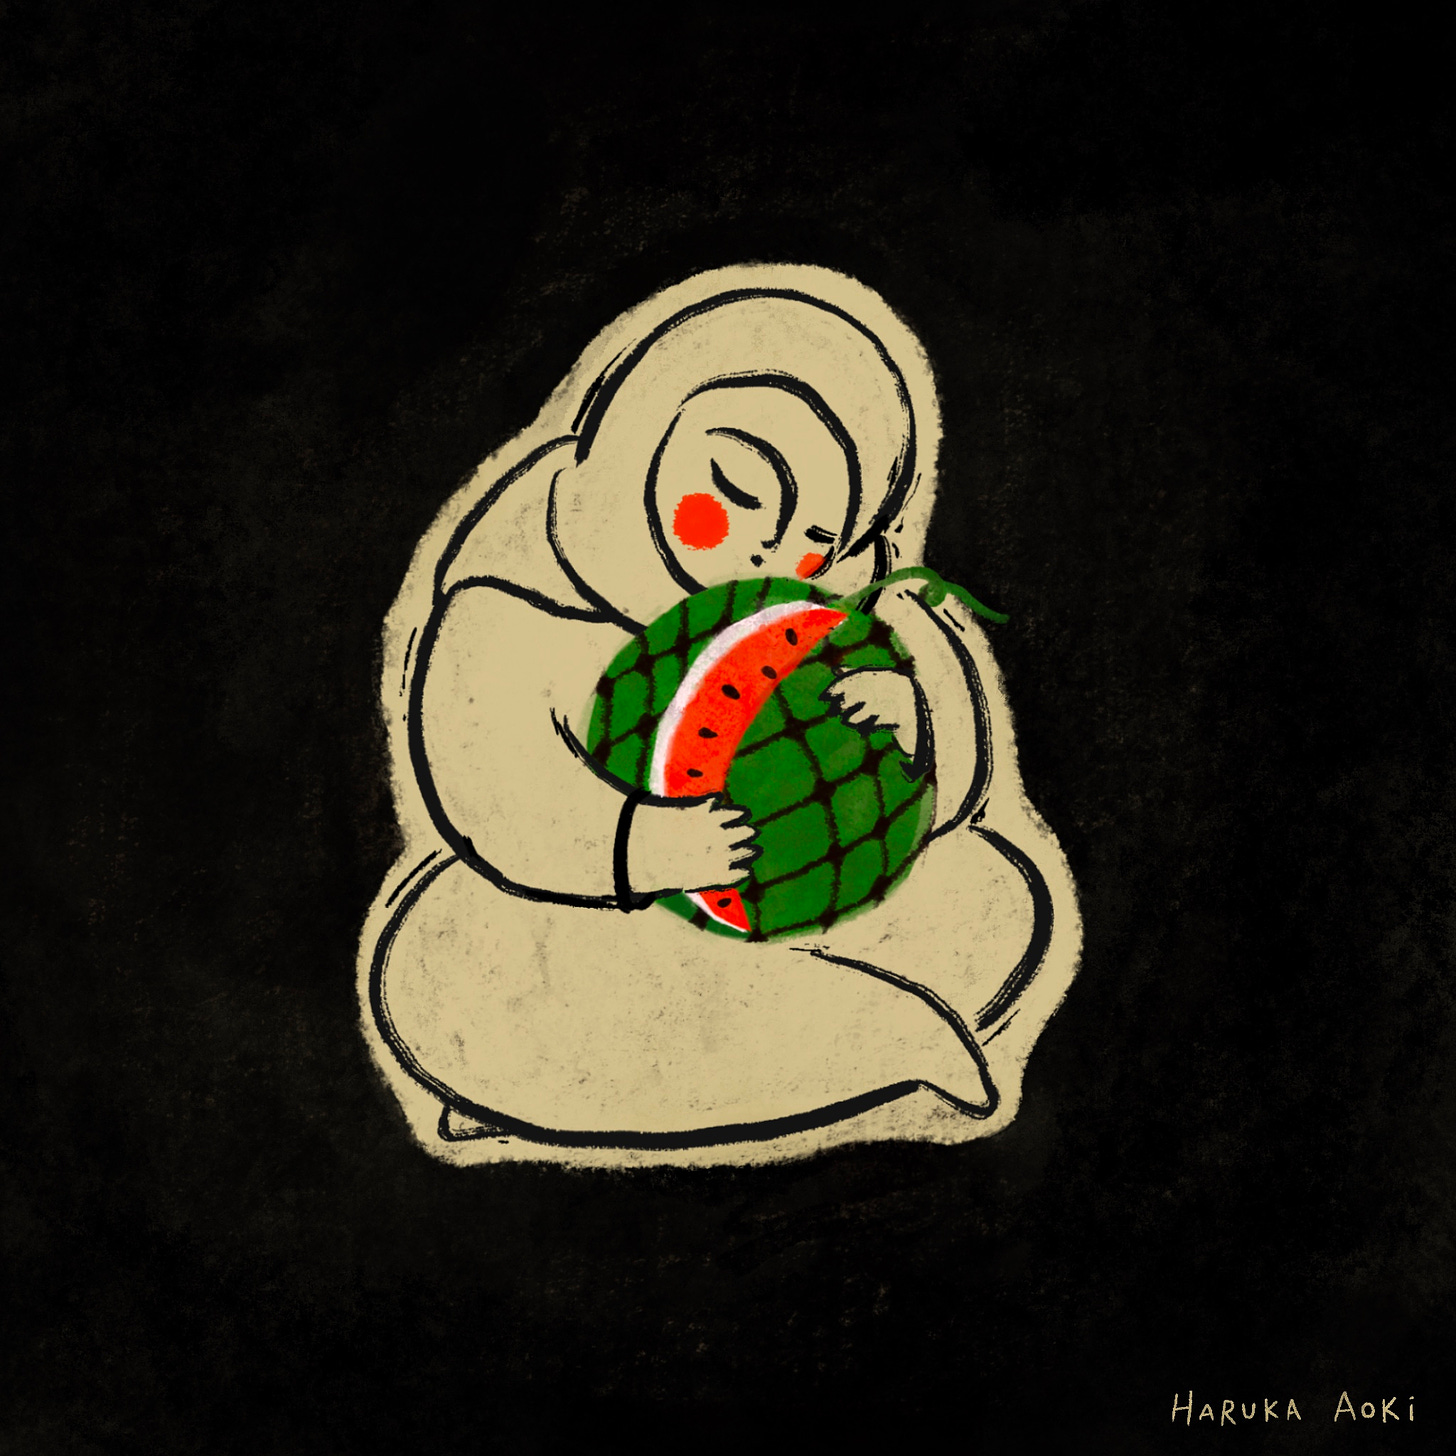 A child wearing a headscarf sitting on the ground and hugging a watermelon that has a keffiyeh net pattern